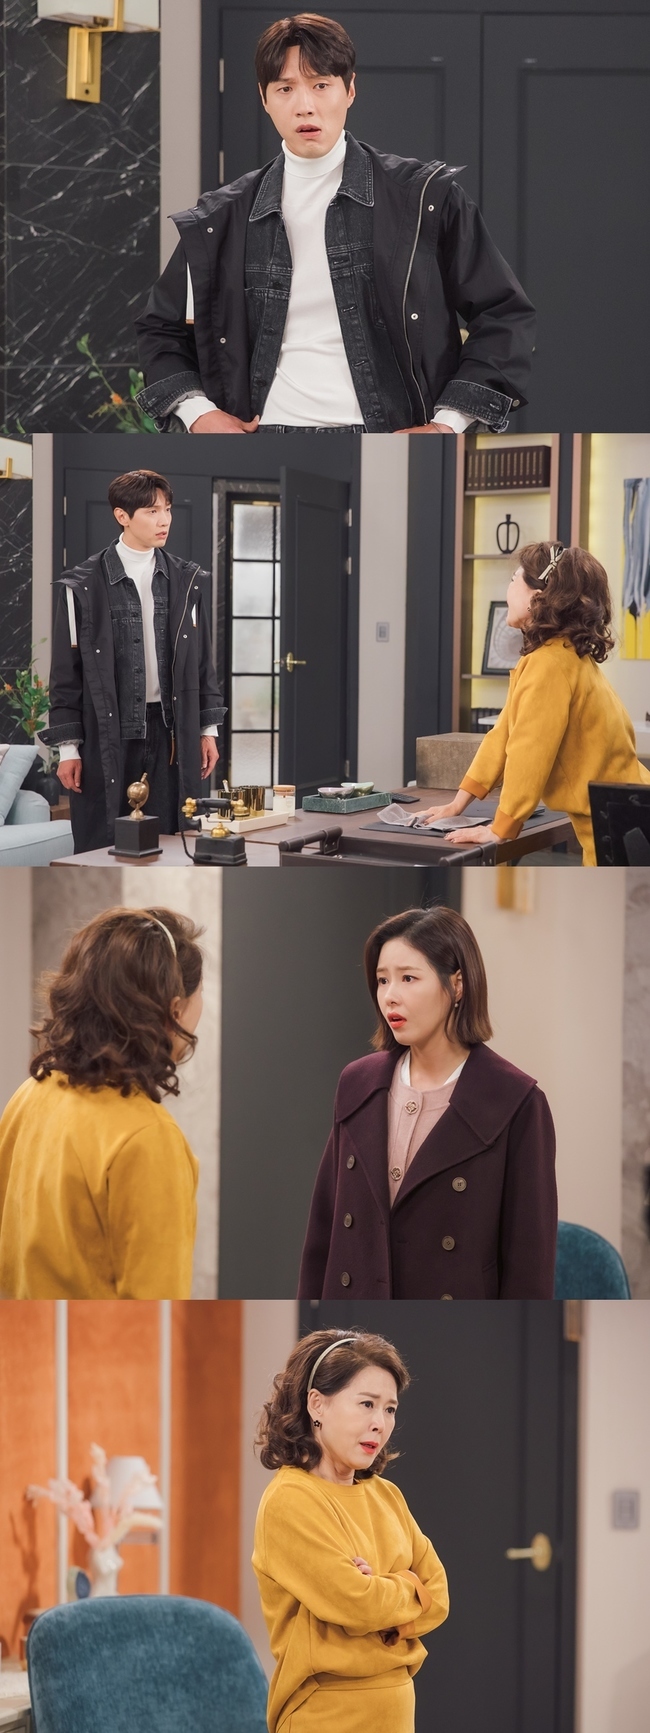 Ji Hyun Woo and Cha Hwa-Yeon will show the top drama chemistry in Gentleman and young lady.In the 19th KBS 2TV weekend Drama Shinto and Young Lady (directed by Shin Chang-seok/playplayplayed by Kim Sa-kyung/produced by Ji An-ji Productions), which airs at 7:55 p.m. on November 27, Ji Hyo (played by Lee Yeong-guk) and Cha Hwa-Yeon (played by Wang Dae-ran) will be hit again.Lee Yeong-guk (Ji Hyun Woo), who had earlier injured his head in the mountain, did not remember after he was 22 years old and was fooled by Jo Sa-ras scheme.Especially, when he sees the king, he shows the relationship between the two people.In addition, Wang Dae-ran (Cha Hwa-Yeon) believes that Lee Young-guk has the missing items in the safeIn the meantime, the photo released on the 21st shows Lee Young-guk, who is very angry.He looks disapprovingly unhappy, and his hands are on his waist, which causes curiosity.In another photo, Lee Yeong-guk is frowning at the sight of Wang Dae-ran in his library.Wang is surprised at the sudden appearance of Lee Yeong-guk, and also changes his face quickly and gives a gentle smile.What is the reason why she sneaked into the study without a master, and the two roaring chemis are raising expectations for the broadcast.In addition, Josara, who is mixed with difficulty and irritability, is caught and catches her eye. She is tired of facing the king, and she is complaining about it.Wang Dae-ran is holding his arms in front of him as if he is amazing, and his attention is focused on the conversation between the two.